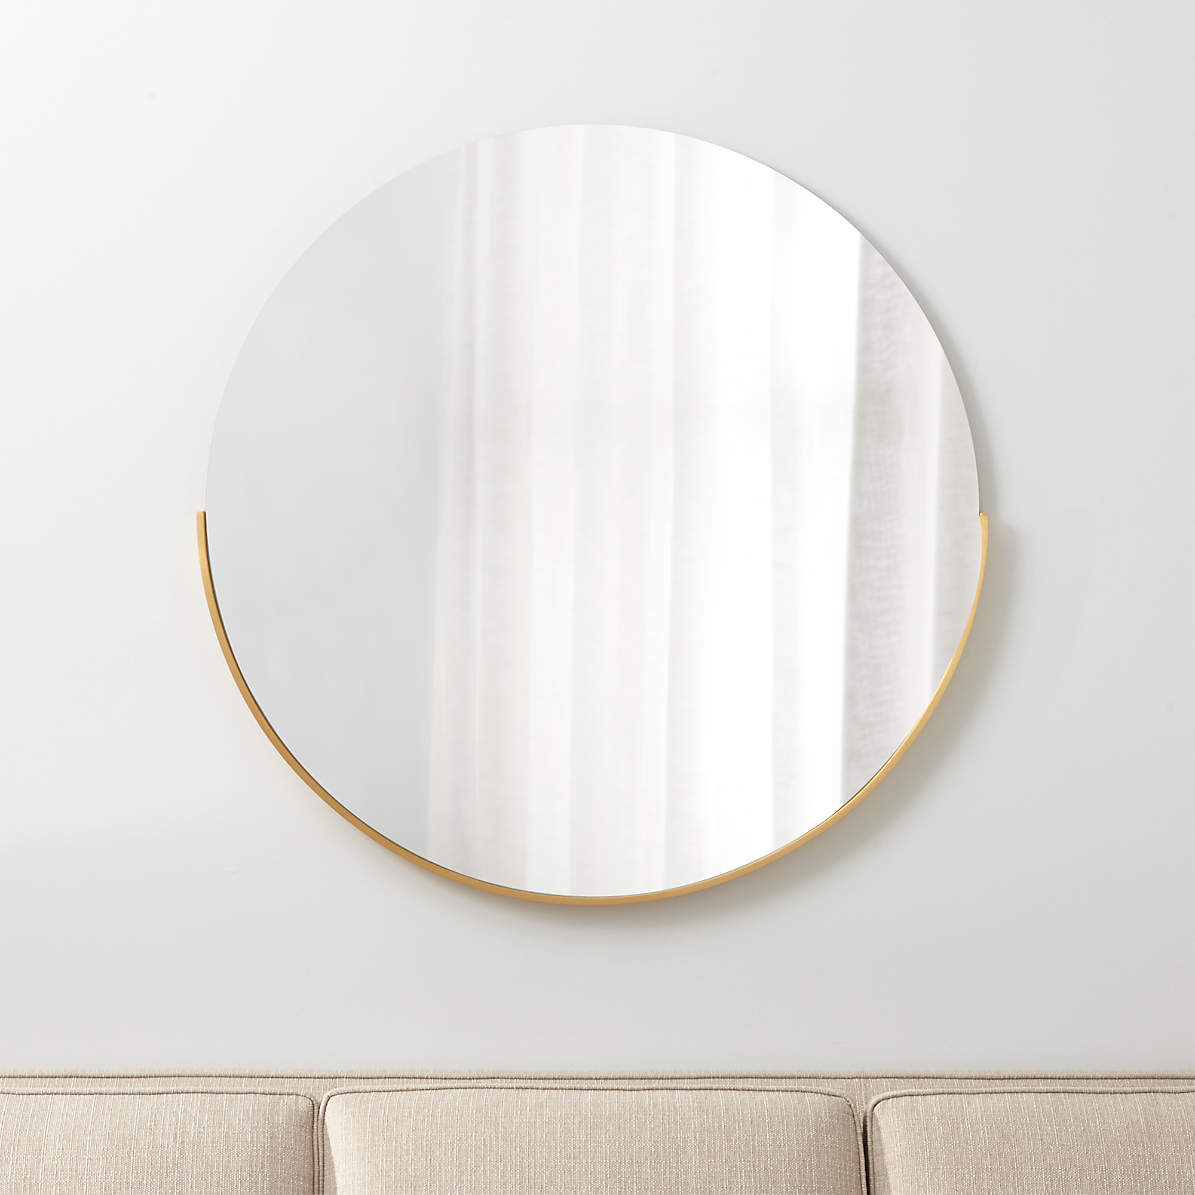 Gerald Large Round Gold Wall Mirror, Large Round Wall Mirrors For Living Room